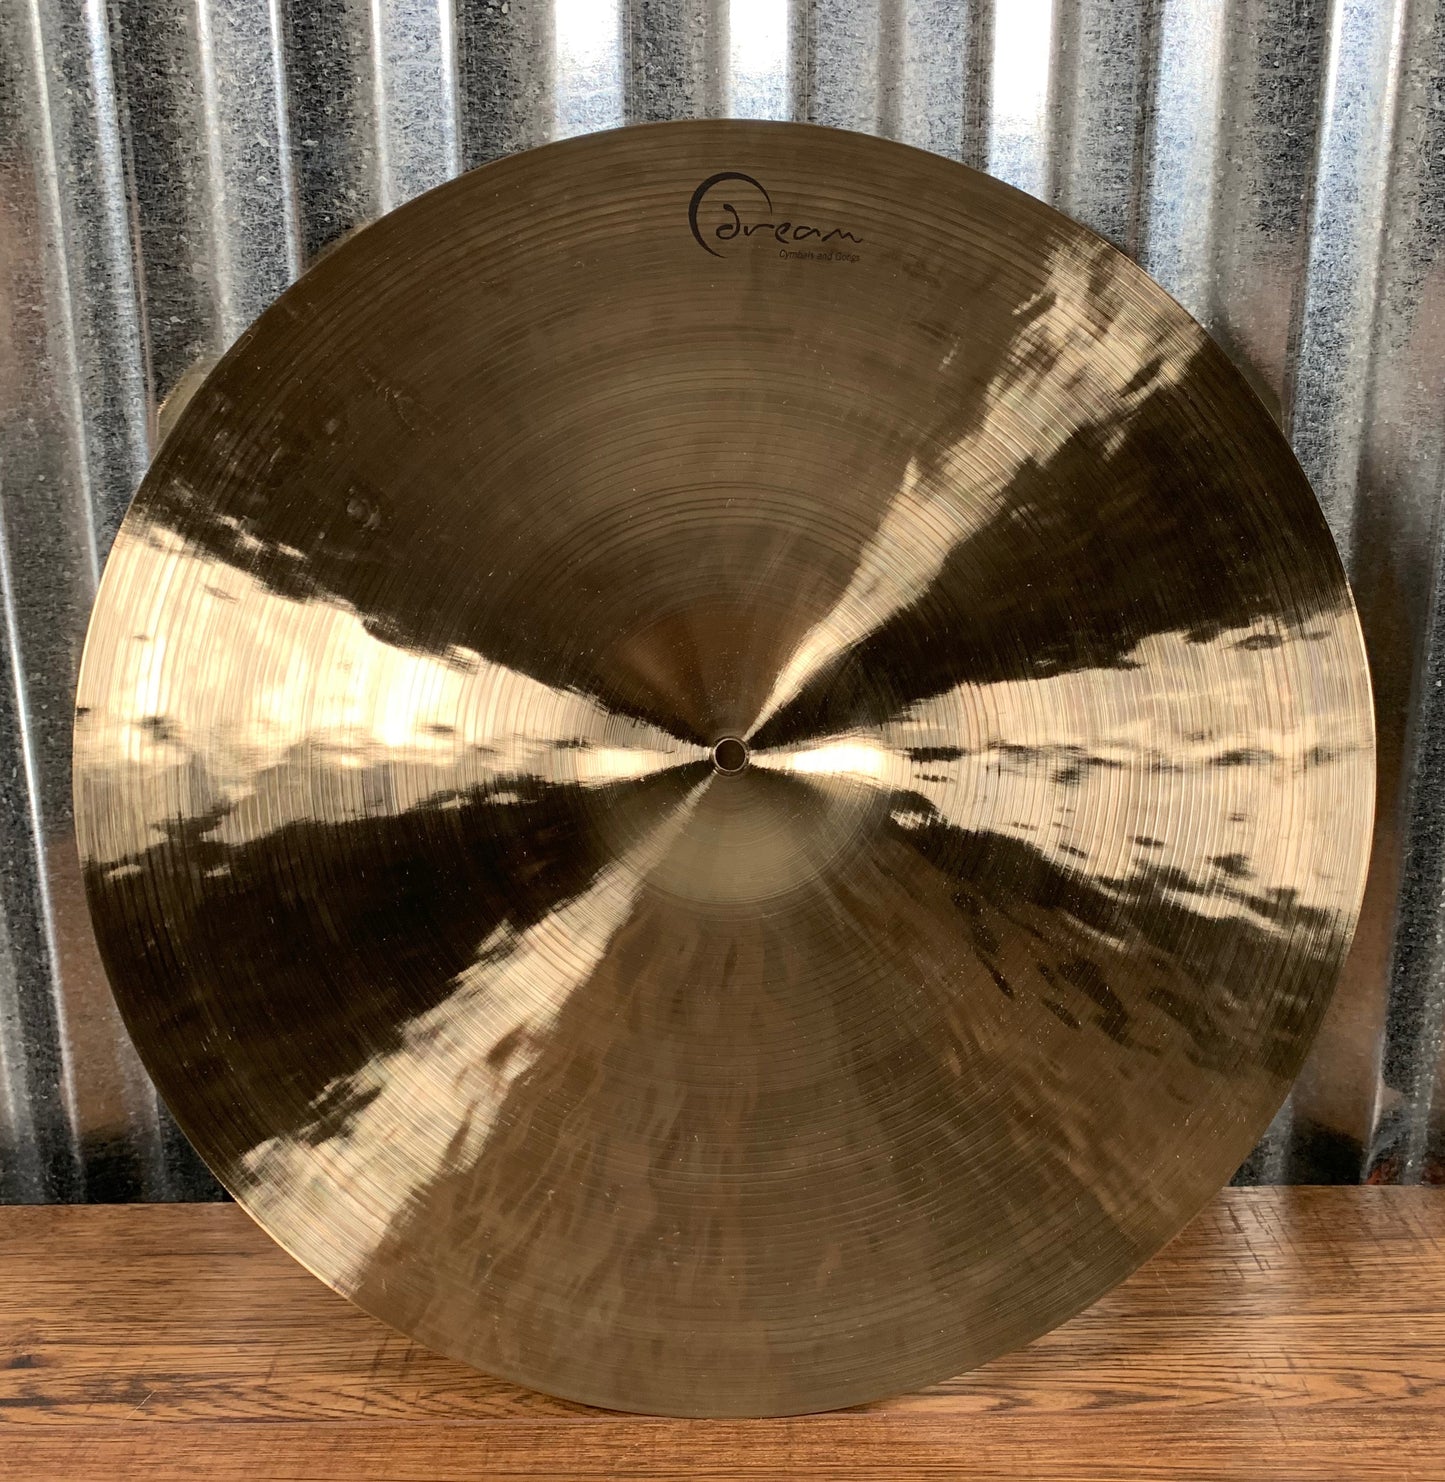 Dream Cymbals C-CRRI20 Contact Series Hand Forged & Hammered 20" Crash Ride